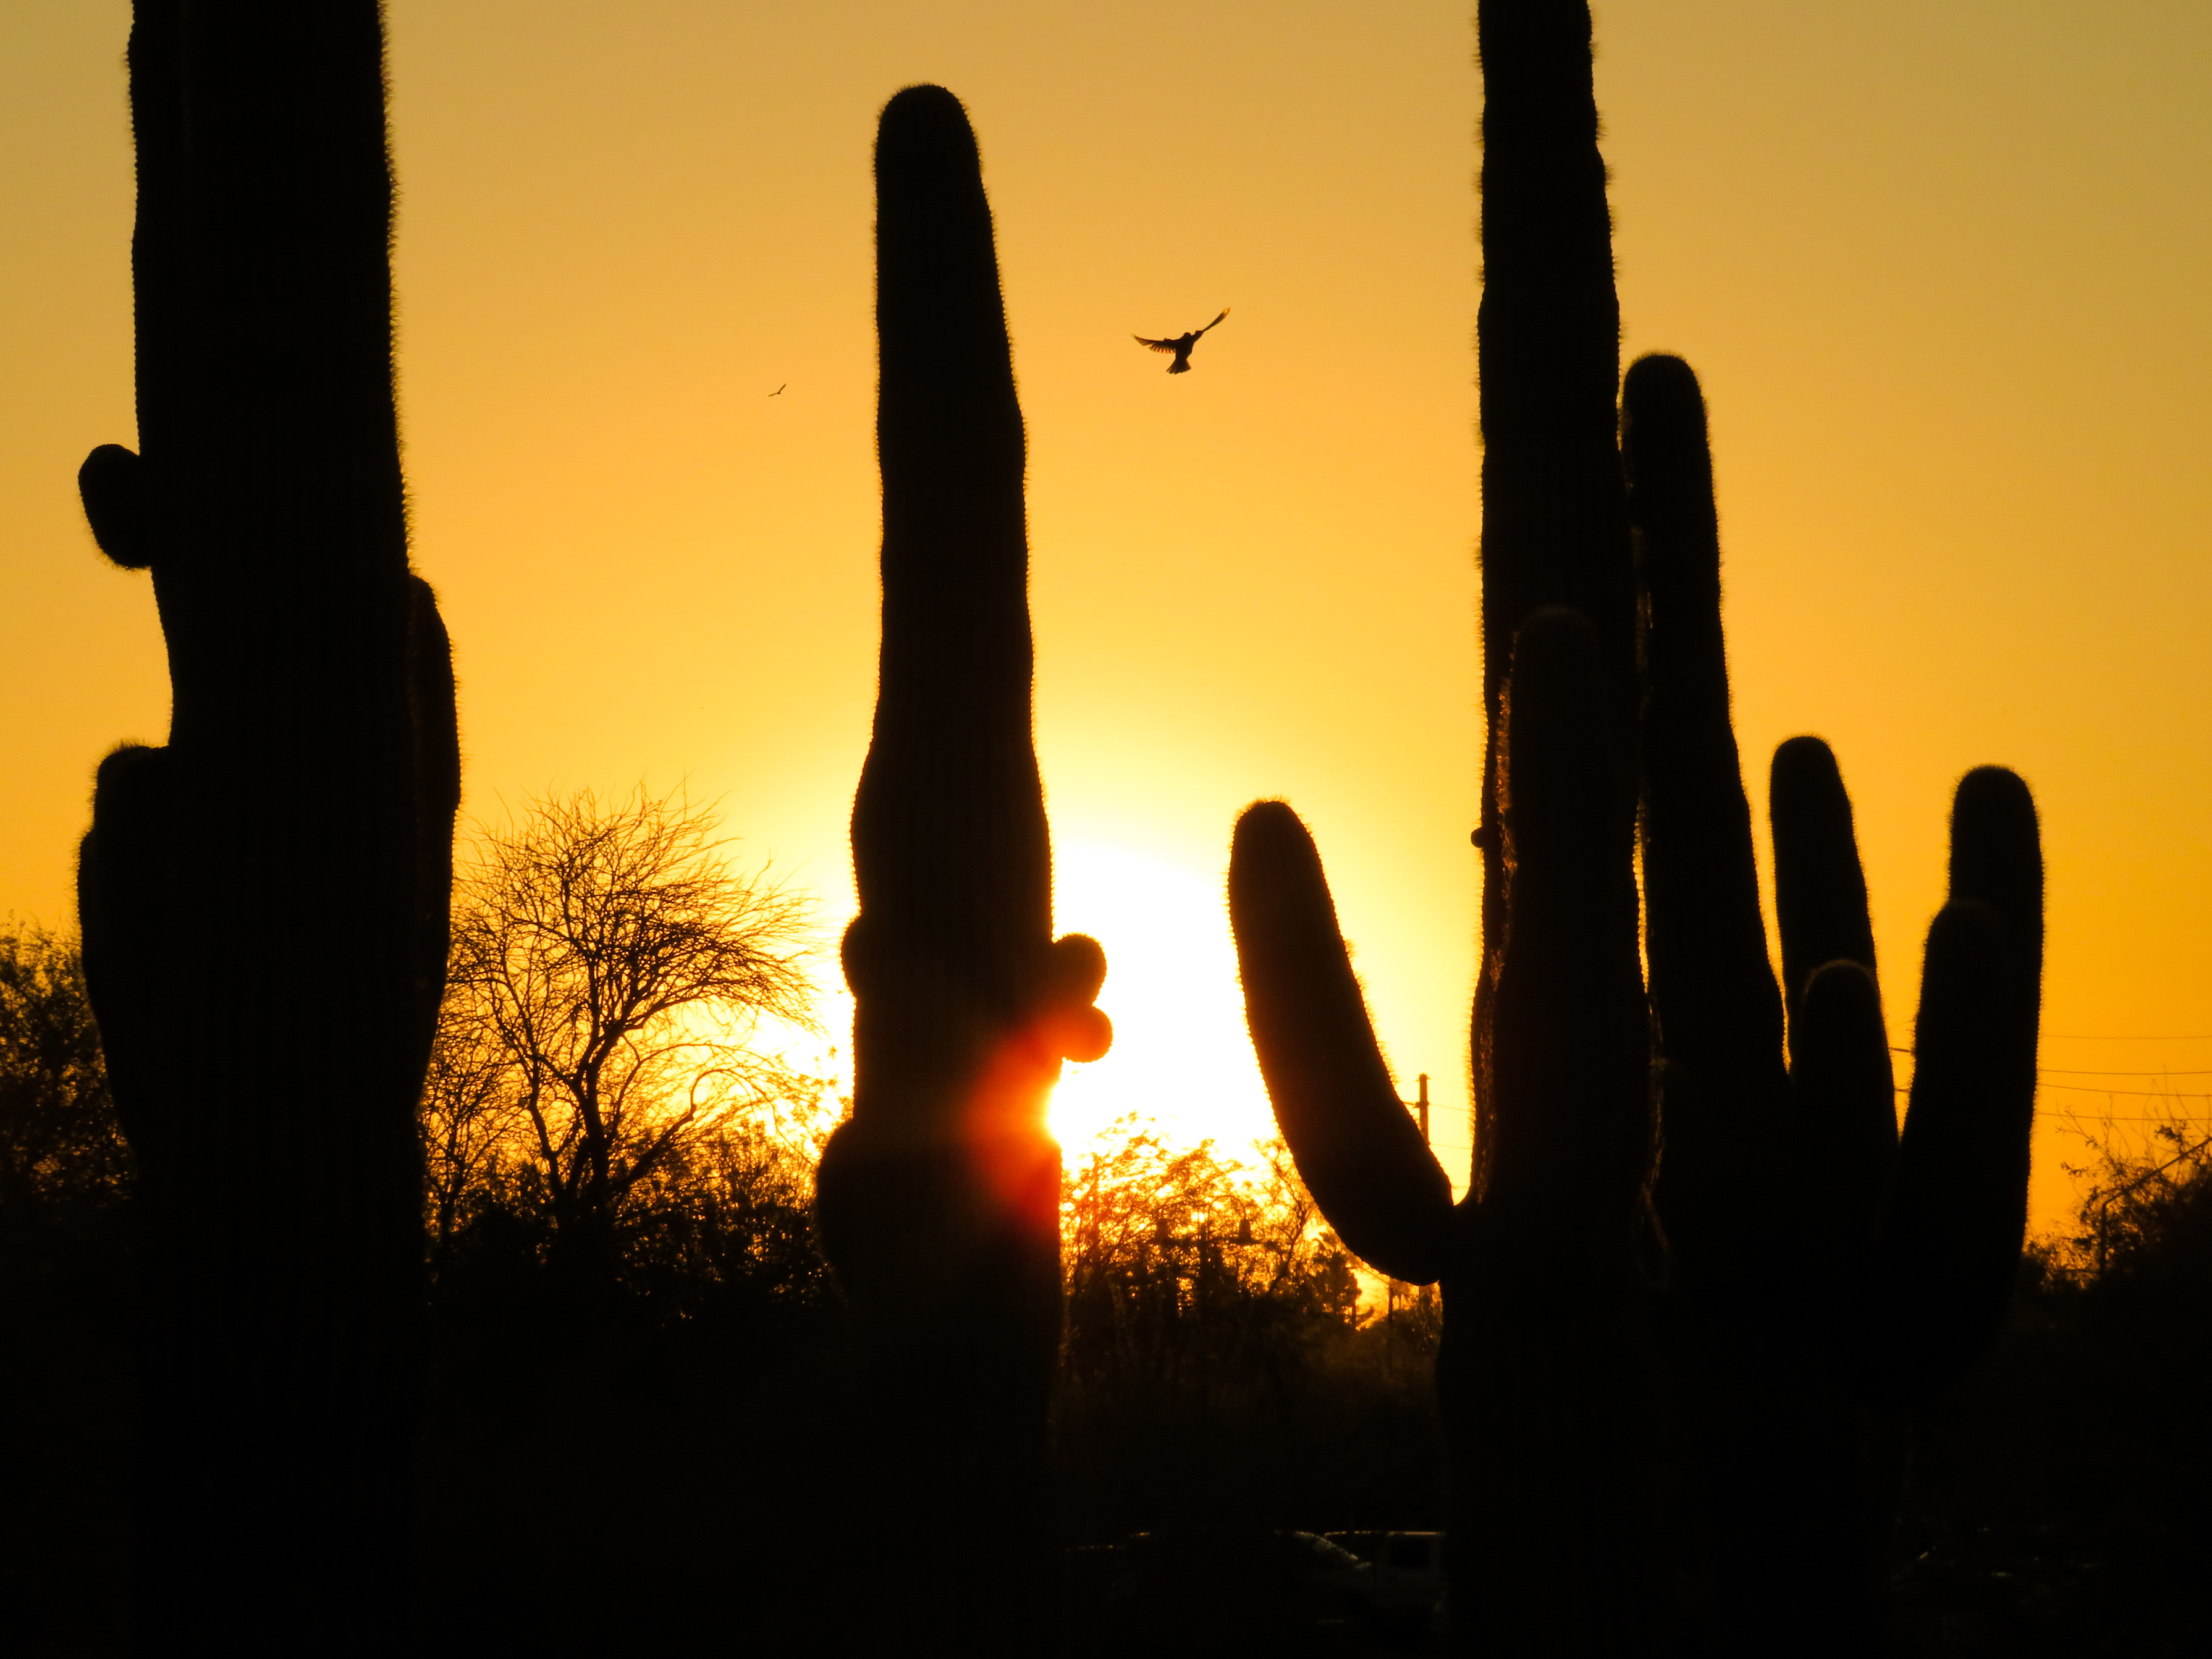 Photo by Gibson Gallares  |  Backlit cacti during golden hour while bird is taking flight. At the Riparian Preserve in Gilbert, AZ 